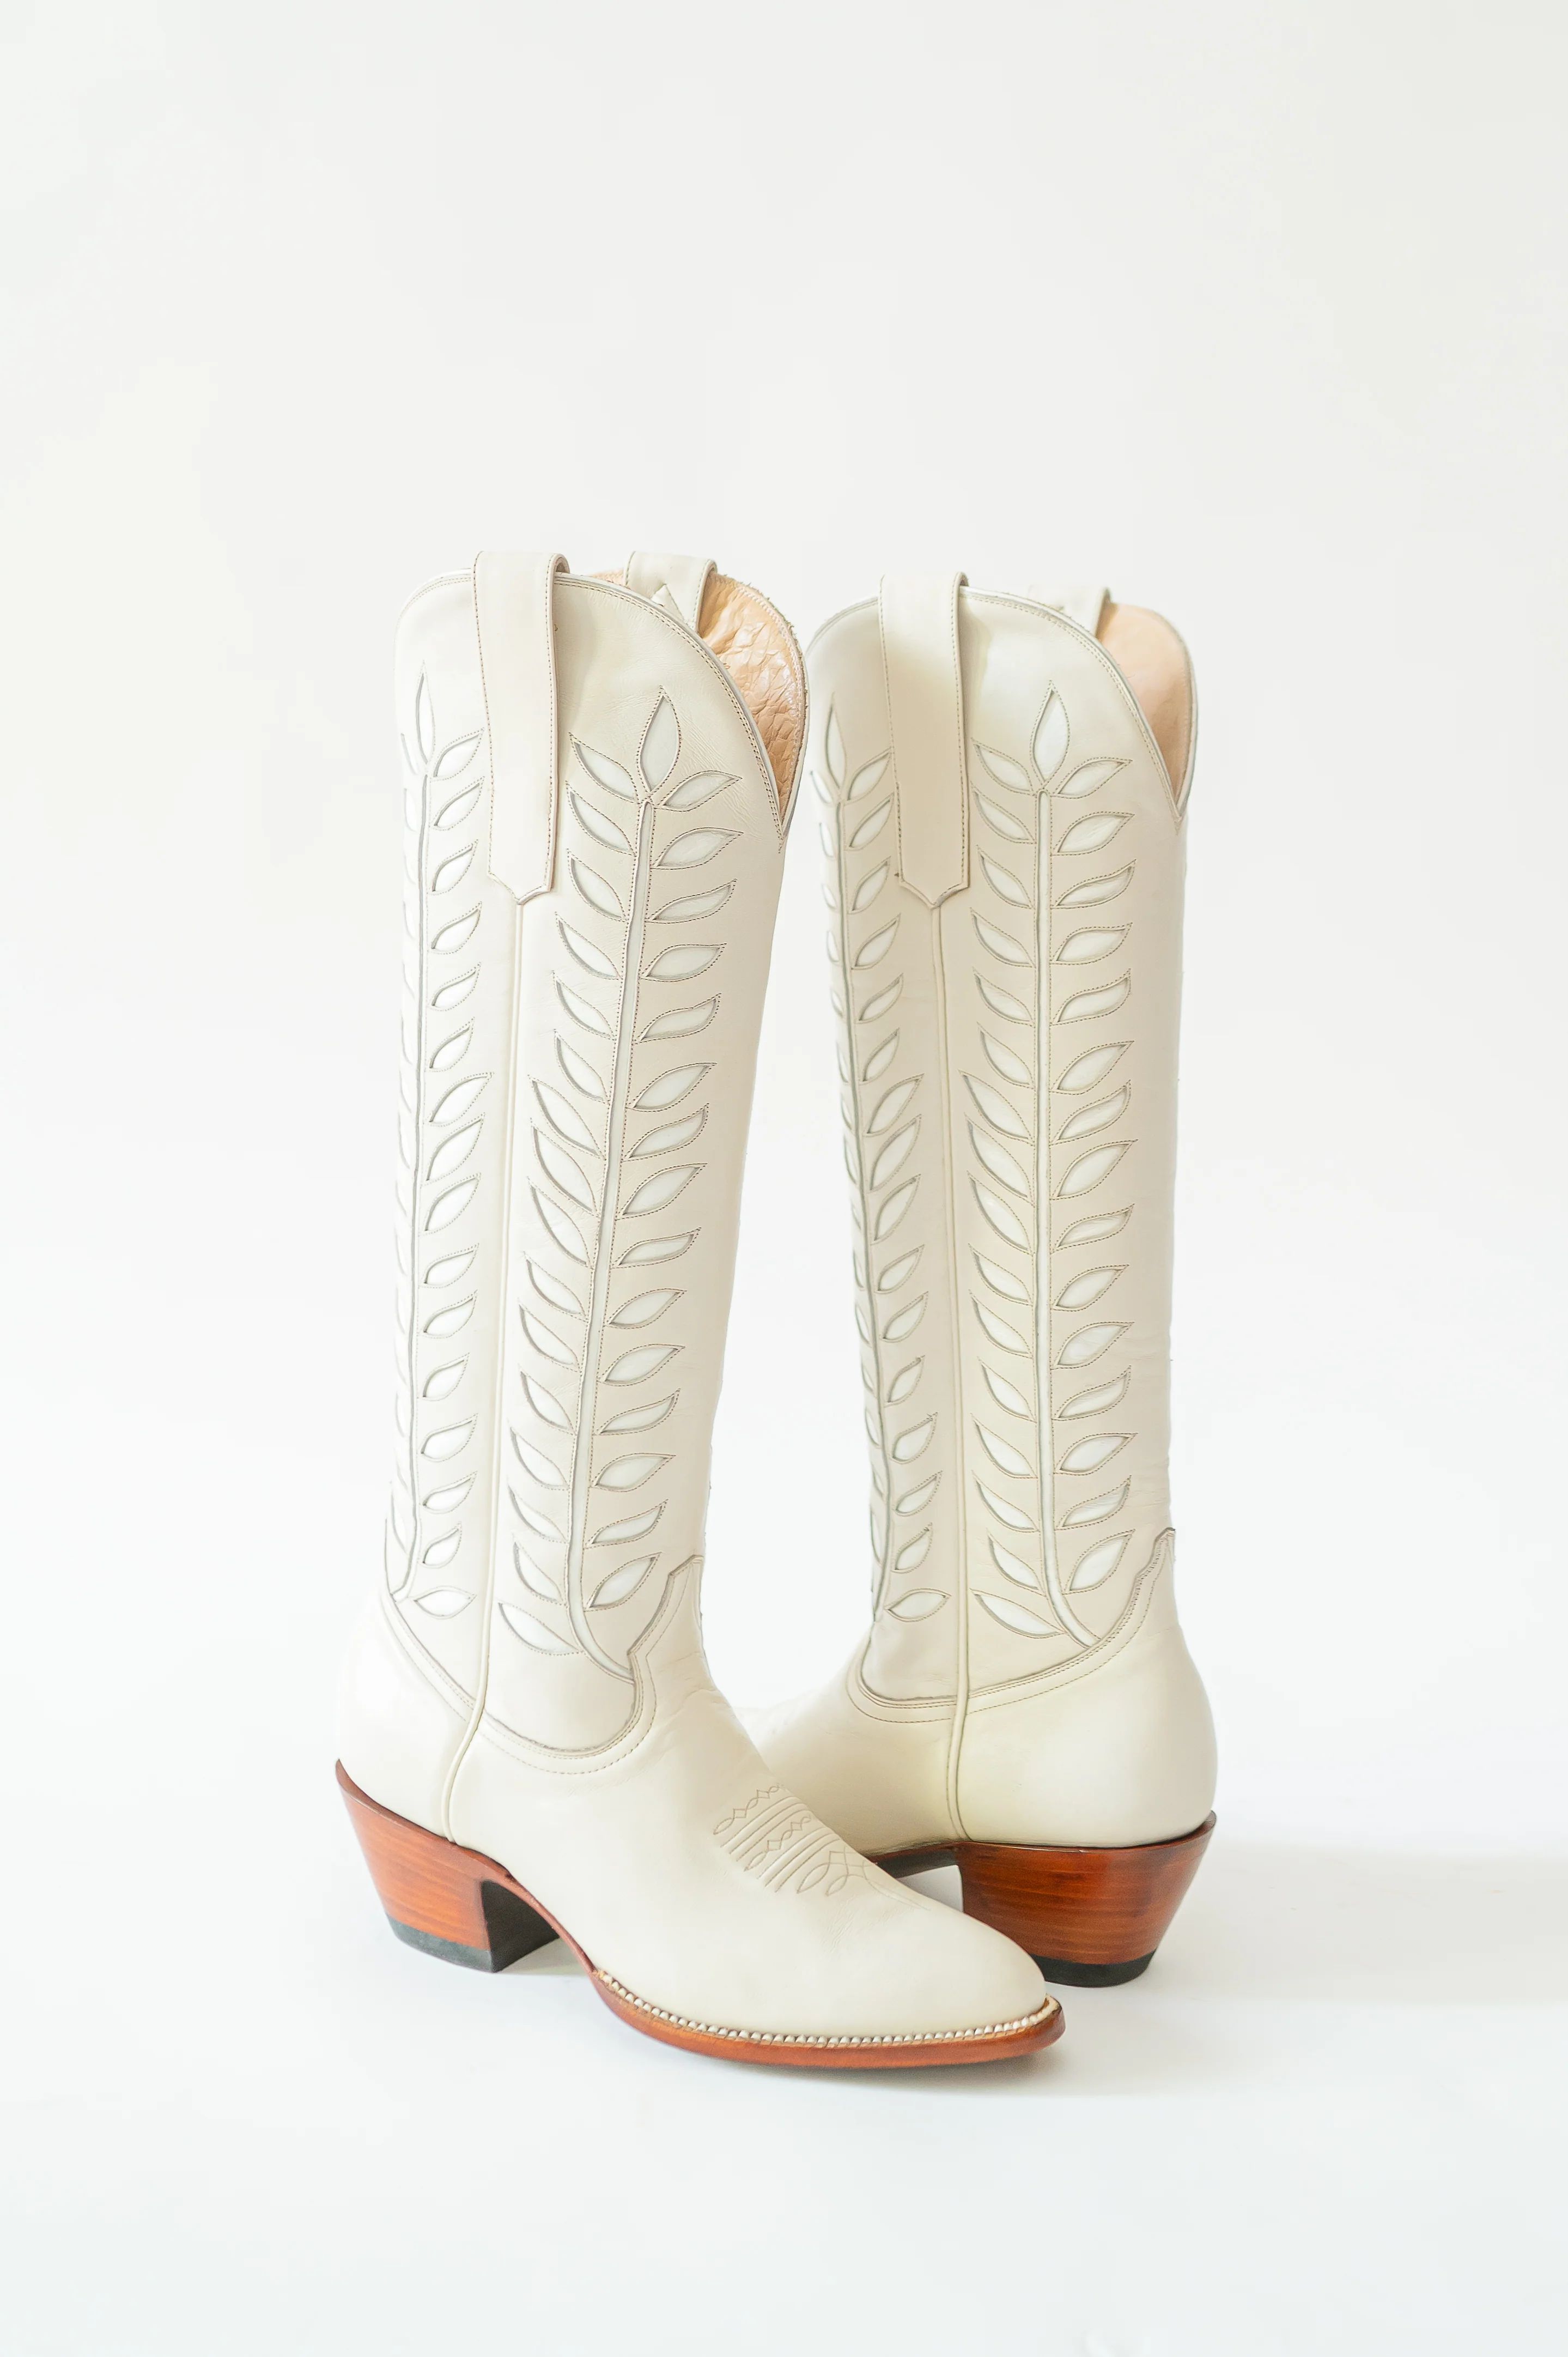 Rory - Chapel Boot - PRE-ORDER (Ships by October 31st) | Petite Paloma